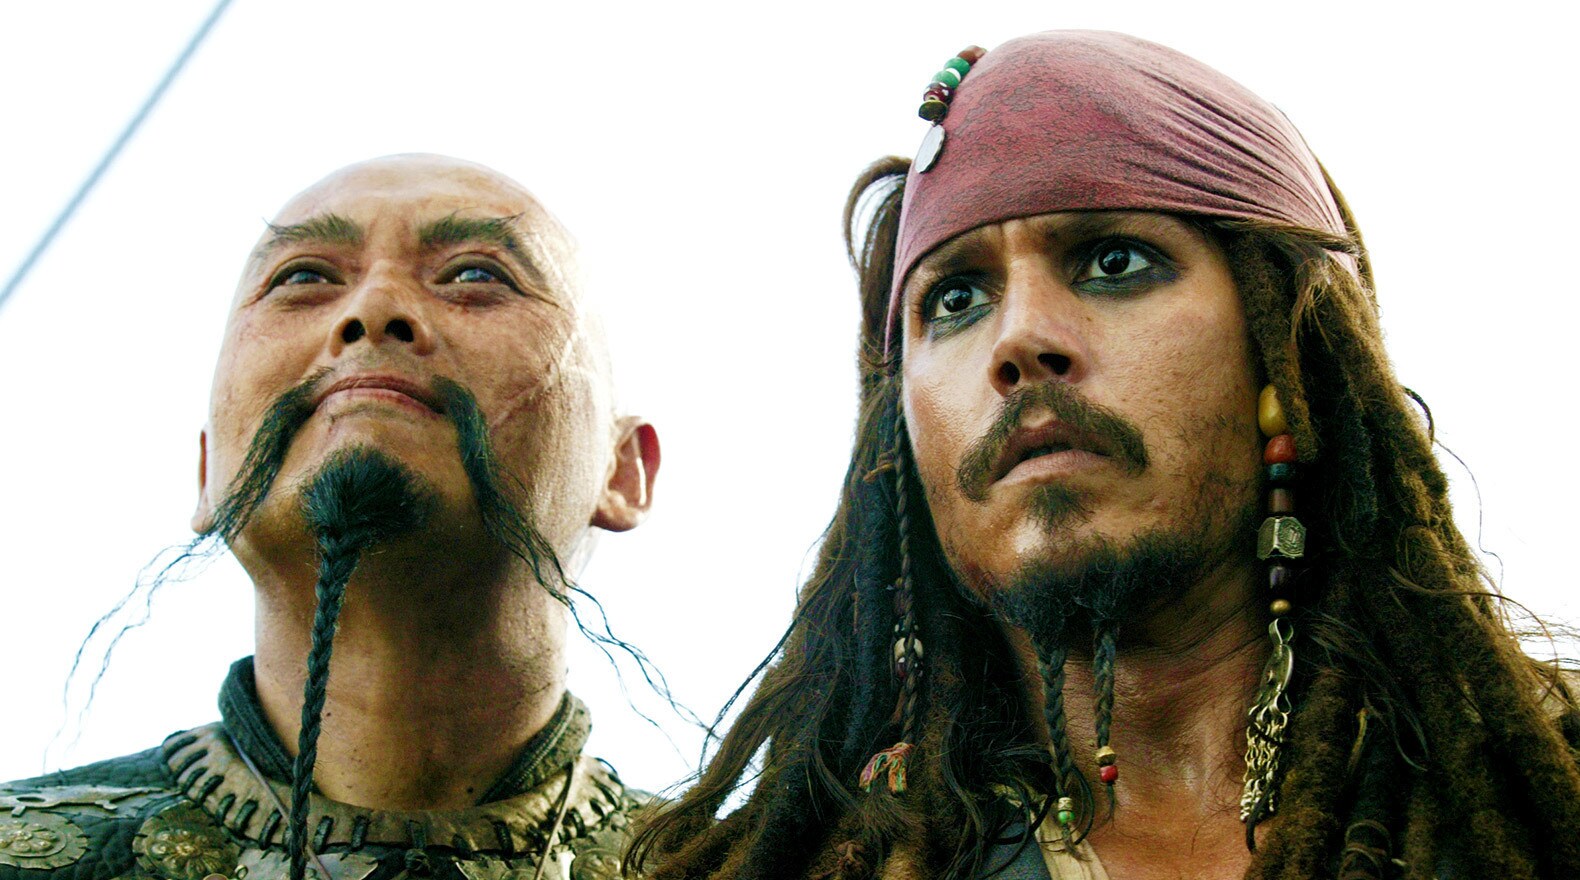 Two of the most legendary pirates ever to roam the seas.